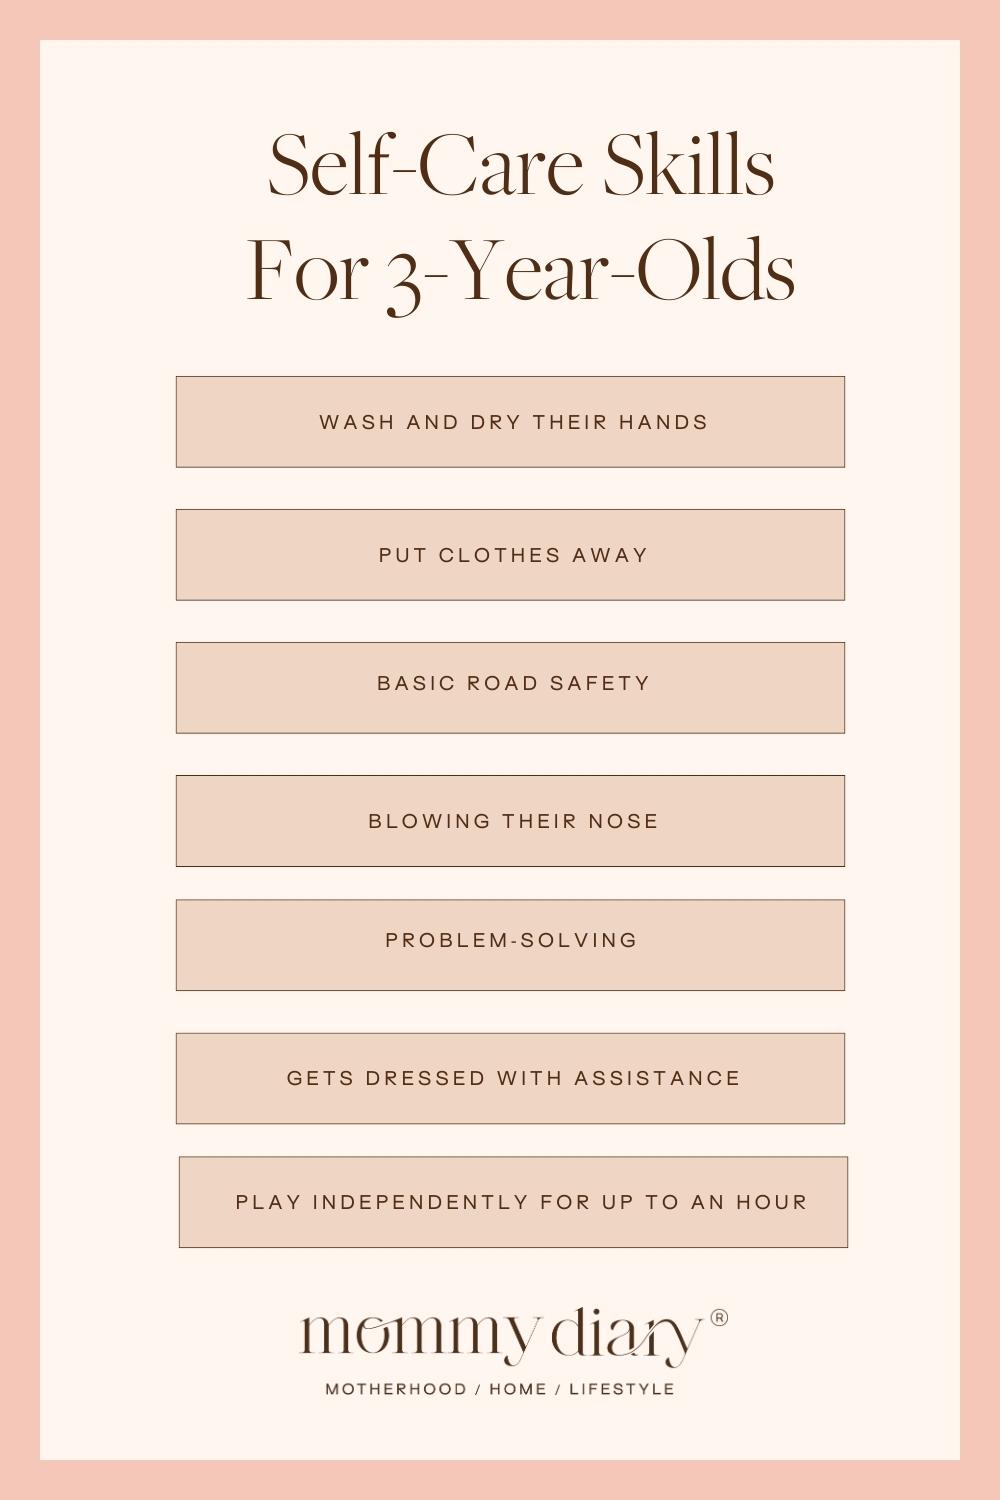 Self-Care Skills For 3-Year Olds